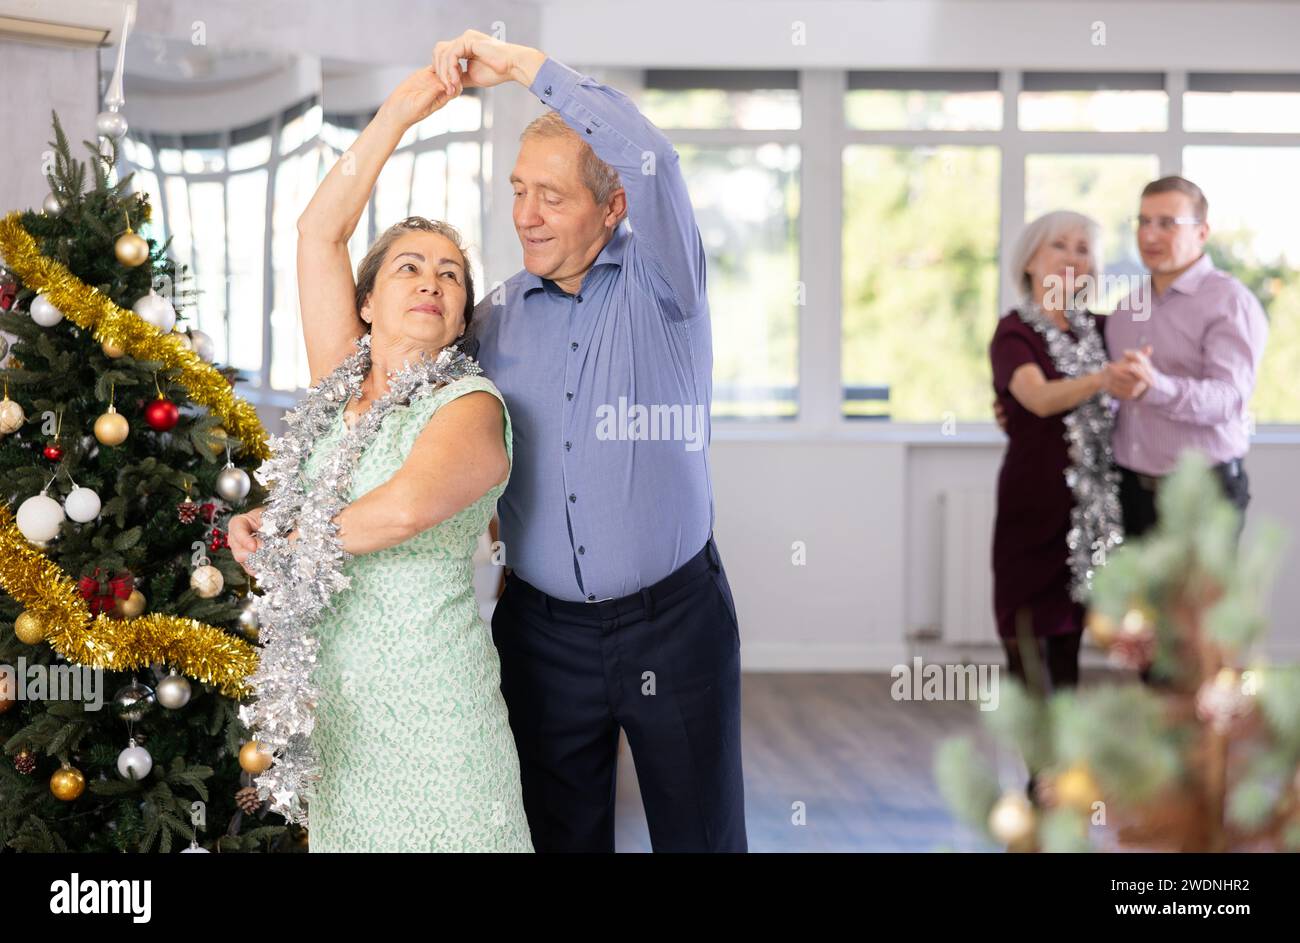 Smiling elderly woman and partner successfully perform mesmerizing movements of paso doble dance during celebration Christmas and New Year Stock Photo